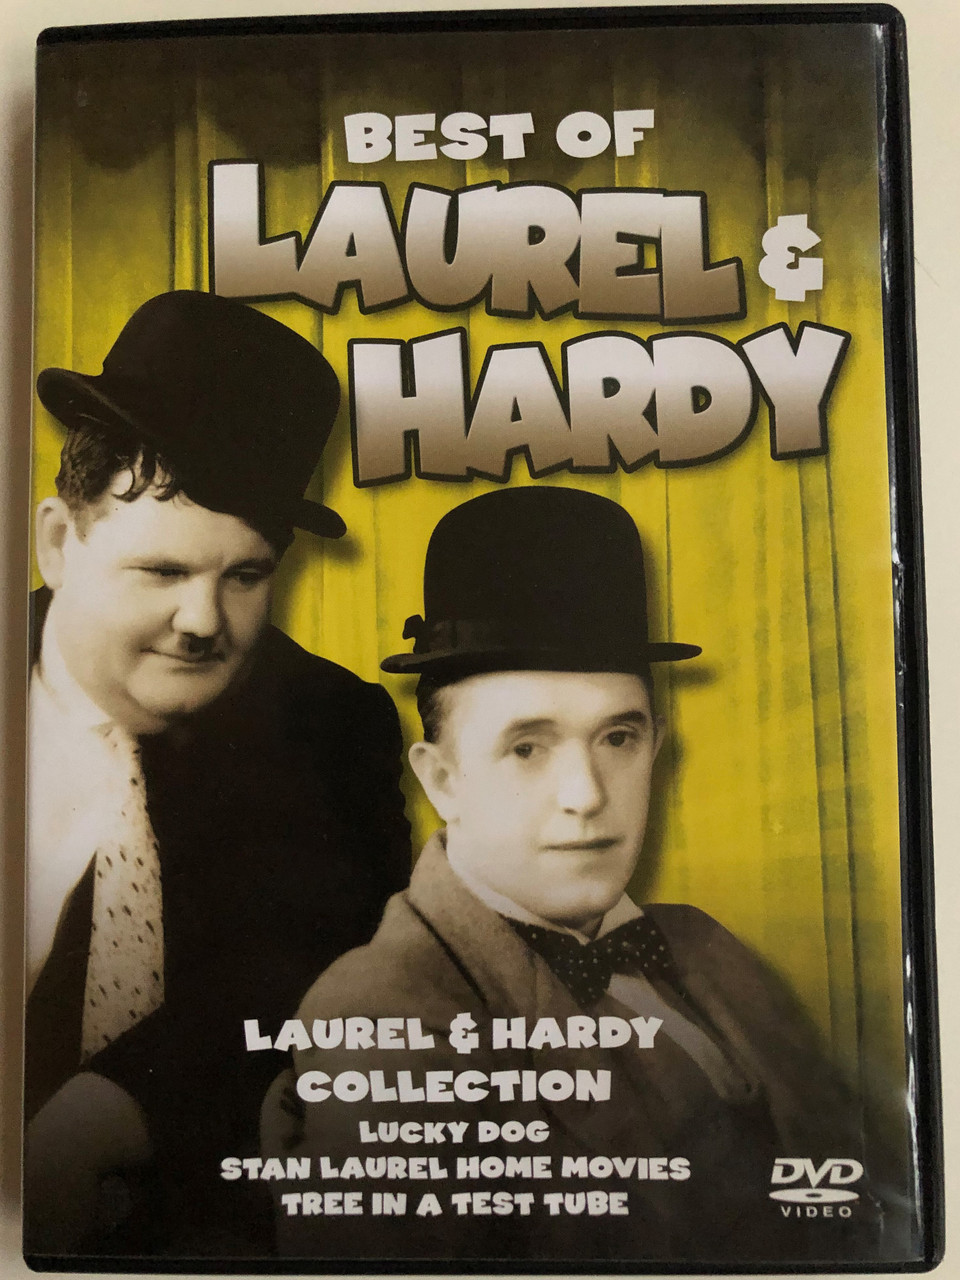 The Best Of Laurel & Hardy DVD 2008 / Laurel & Hardy Collection - Lucky  Dog, Stan Laurel Home Movies - Tree in a test tube / Black & White Comedy  Classic - bibleinmylanguage